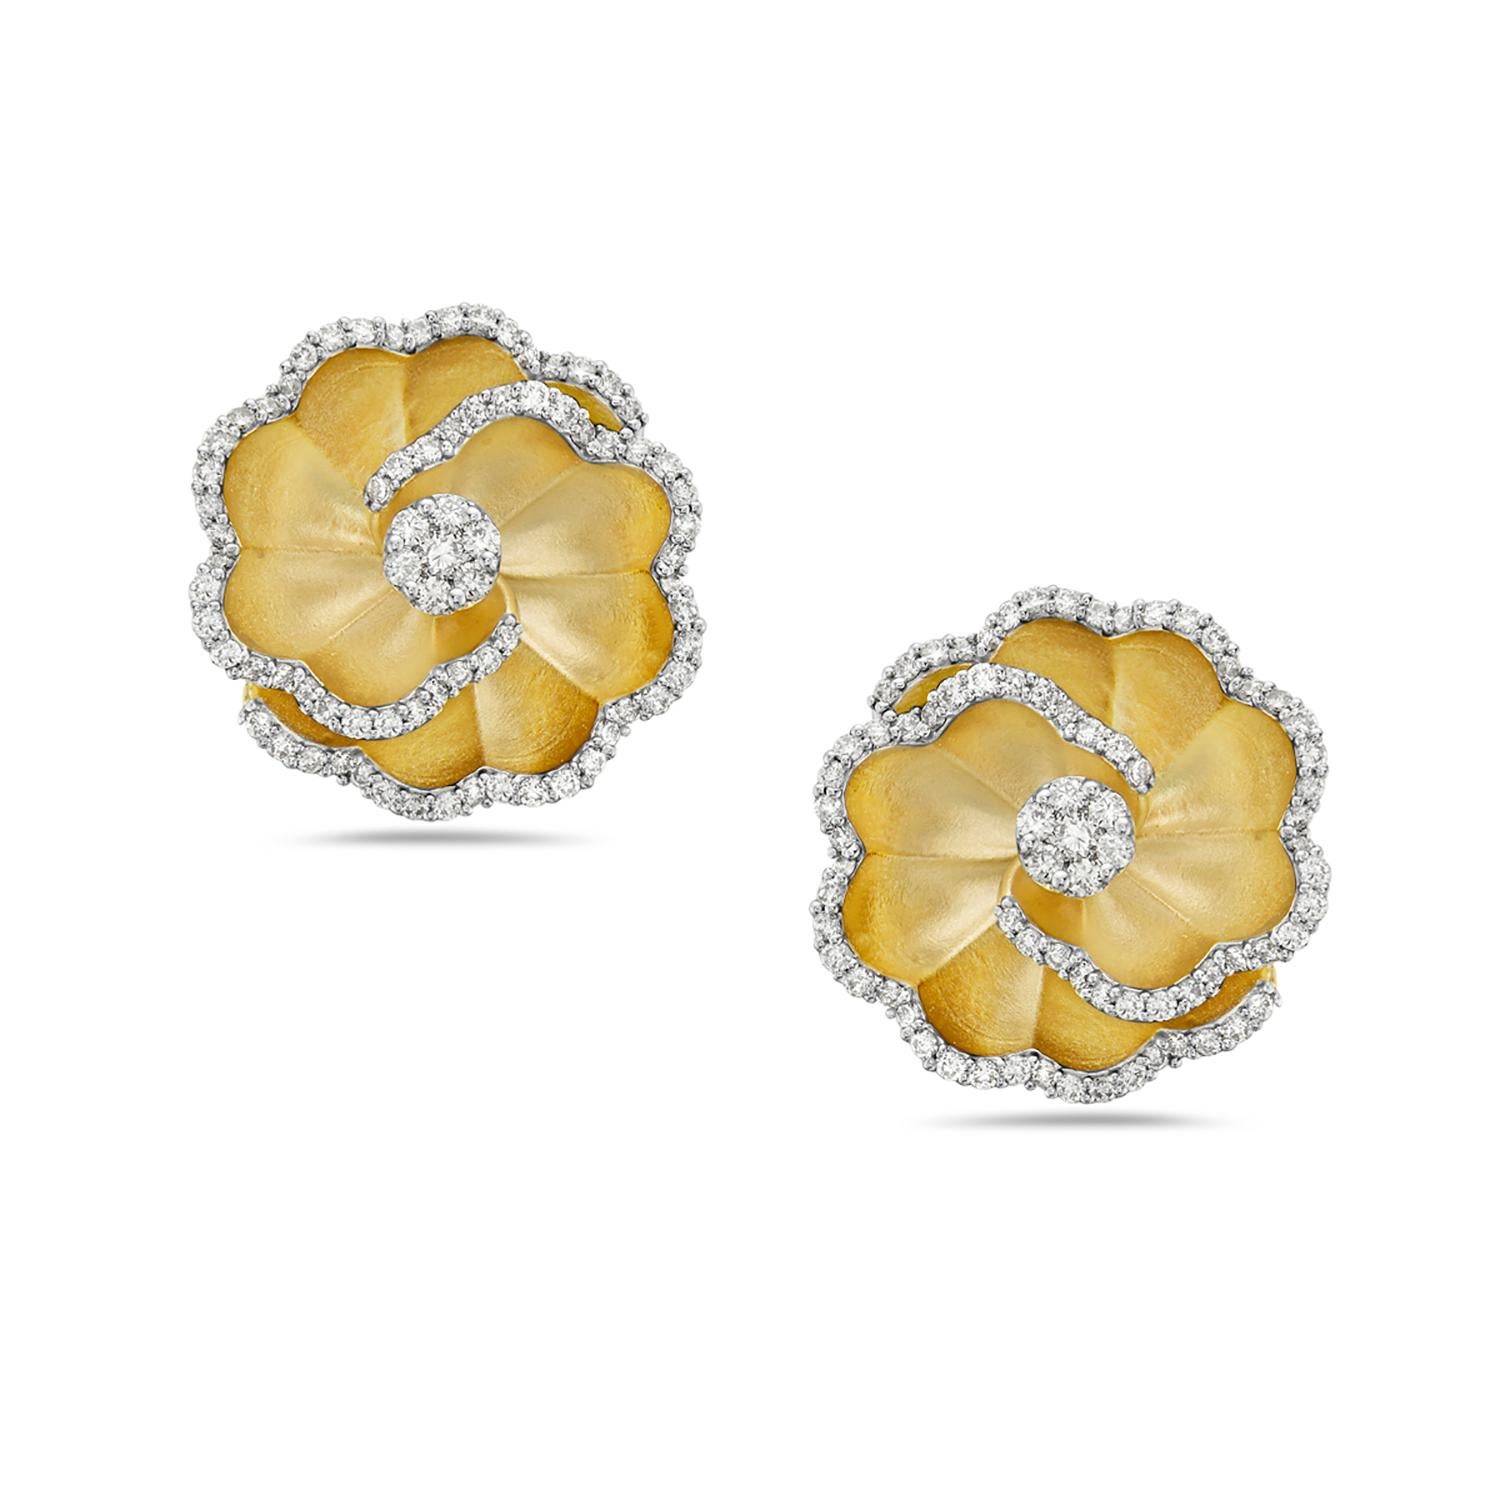 Carved Flower Shaped Earrings Accented with Diamonds Made in 14k Yellow Gold In New Condition For Sale In New York, NY